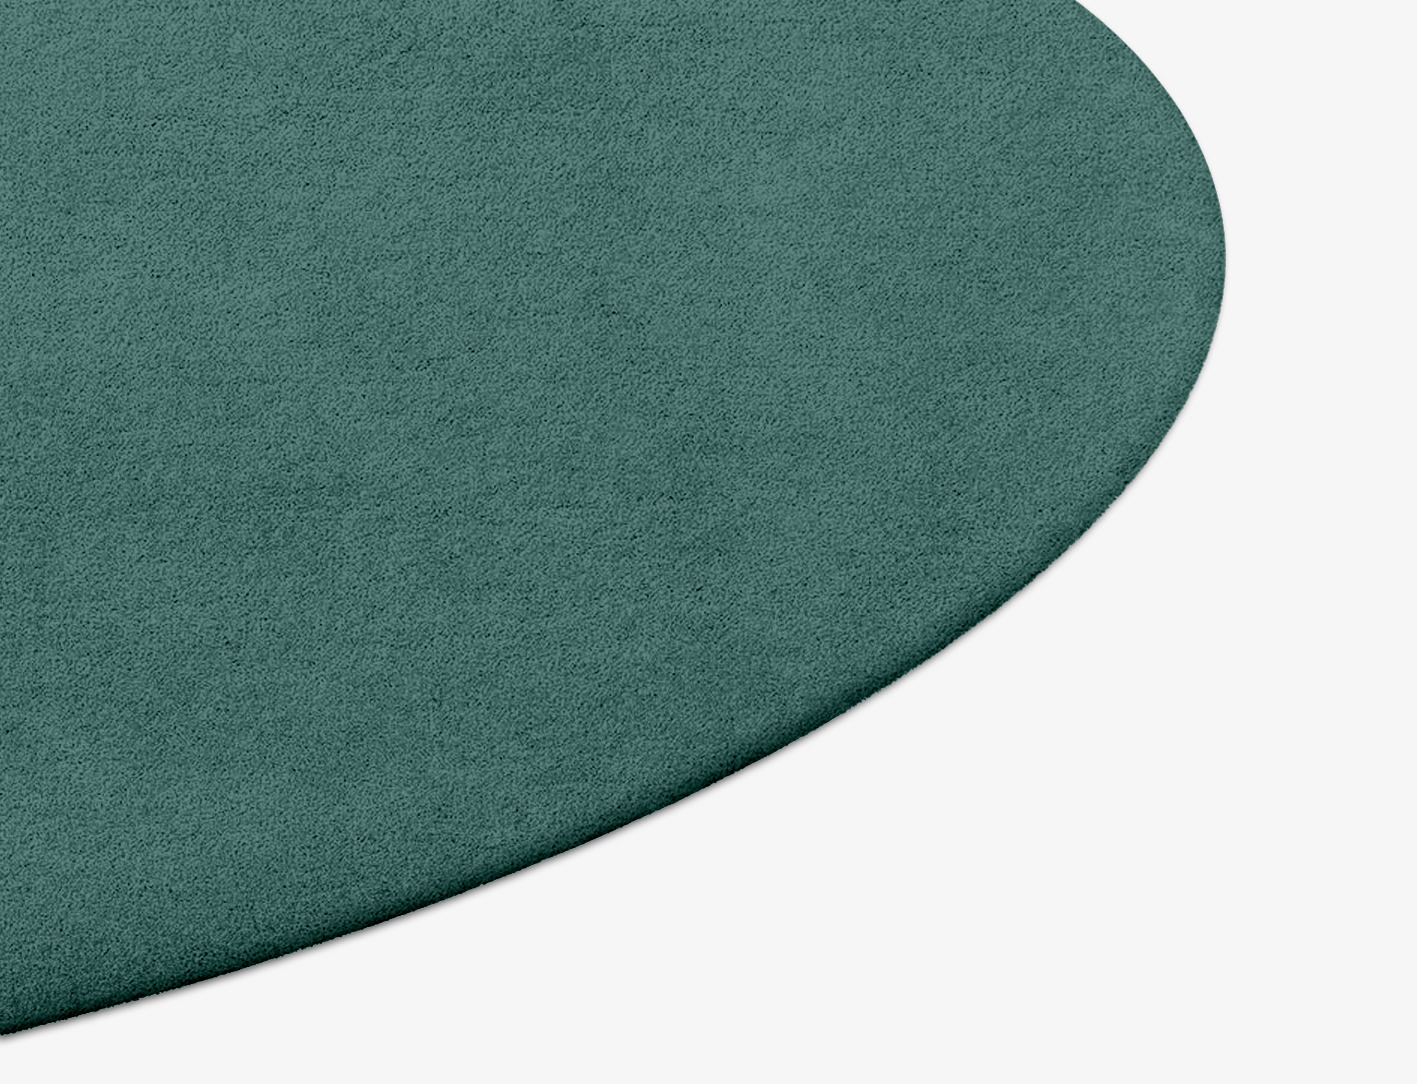 RA-CB07 Solid Colours Round Hand Tufted Pure Wool Custom Rug by Rug Artisan